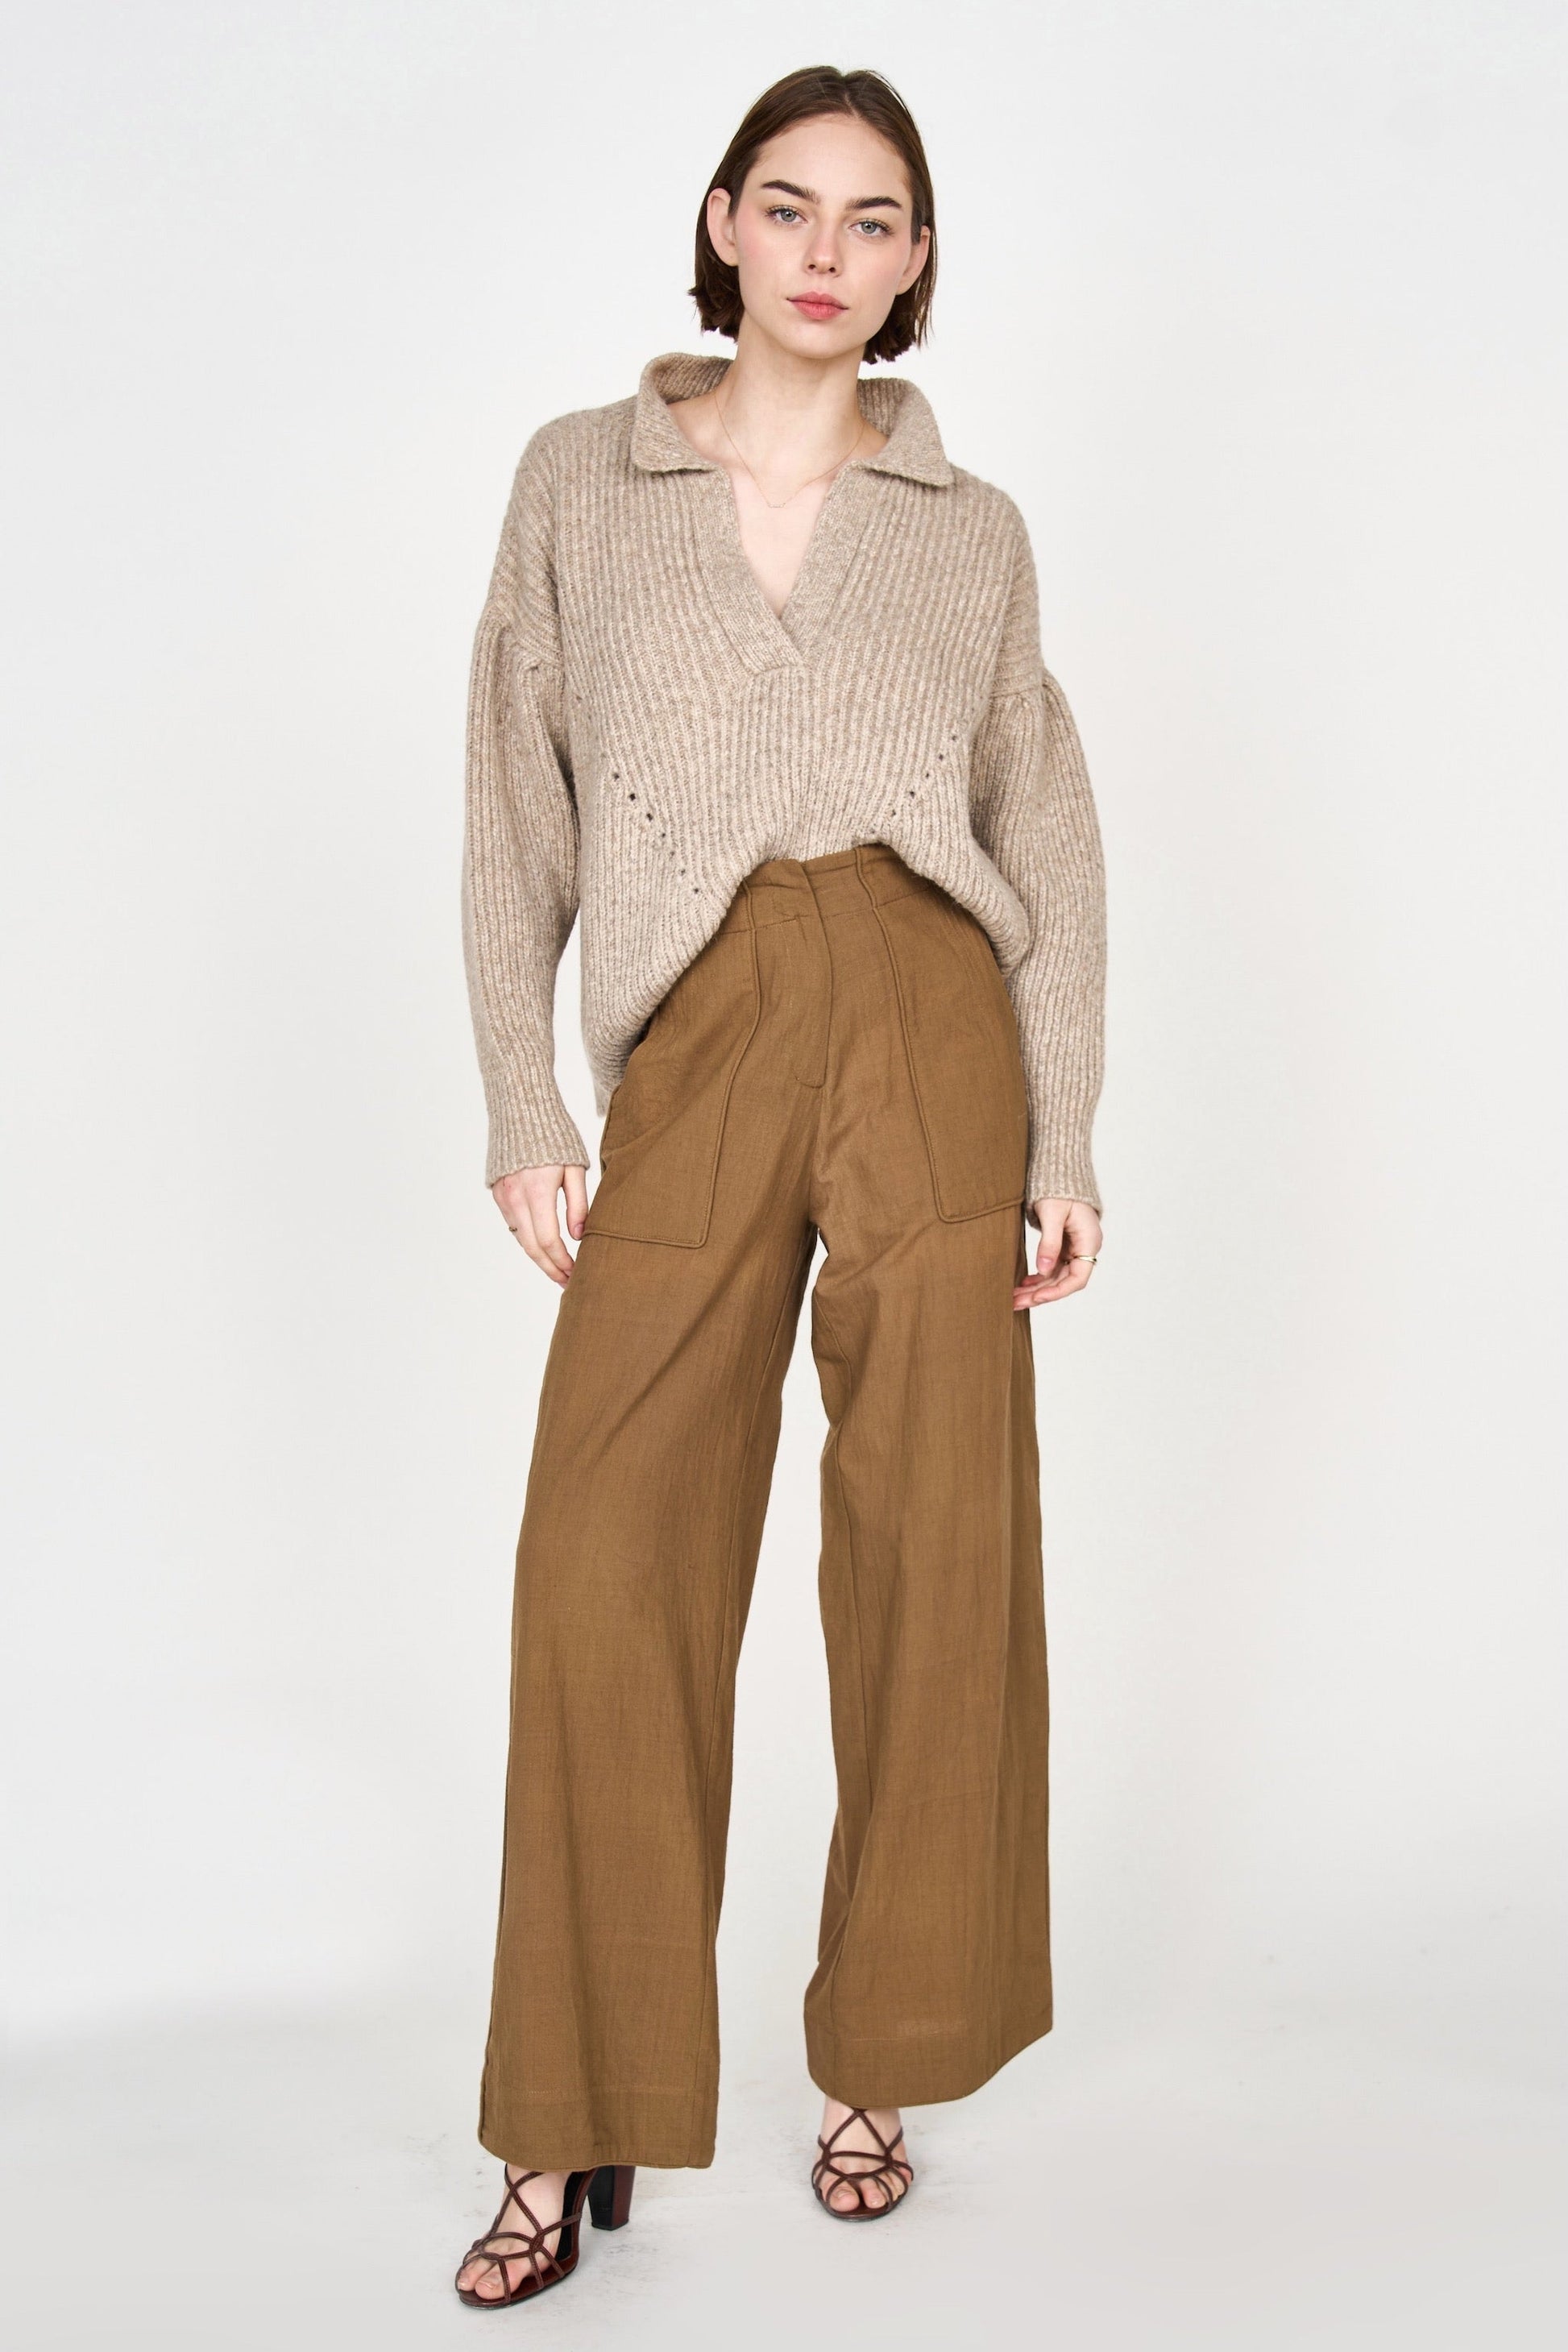 Mirth's best-selling tailored Tivot Pant is now available in a rich, new color for fall. The cotton fabric is hand loomed using hand spun yarns, giving it a textural feel. Ethically made in India.